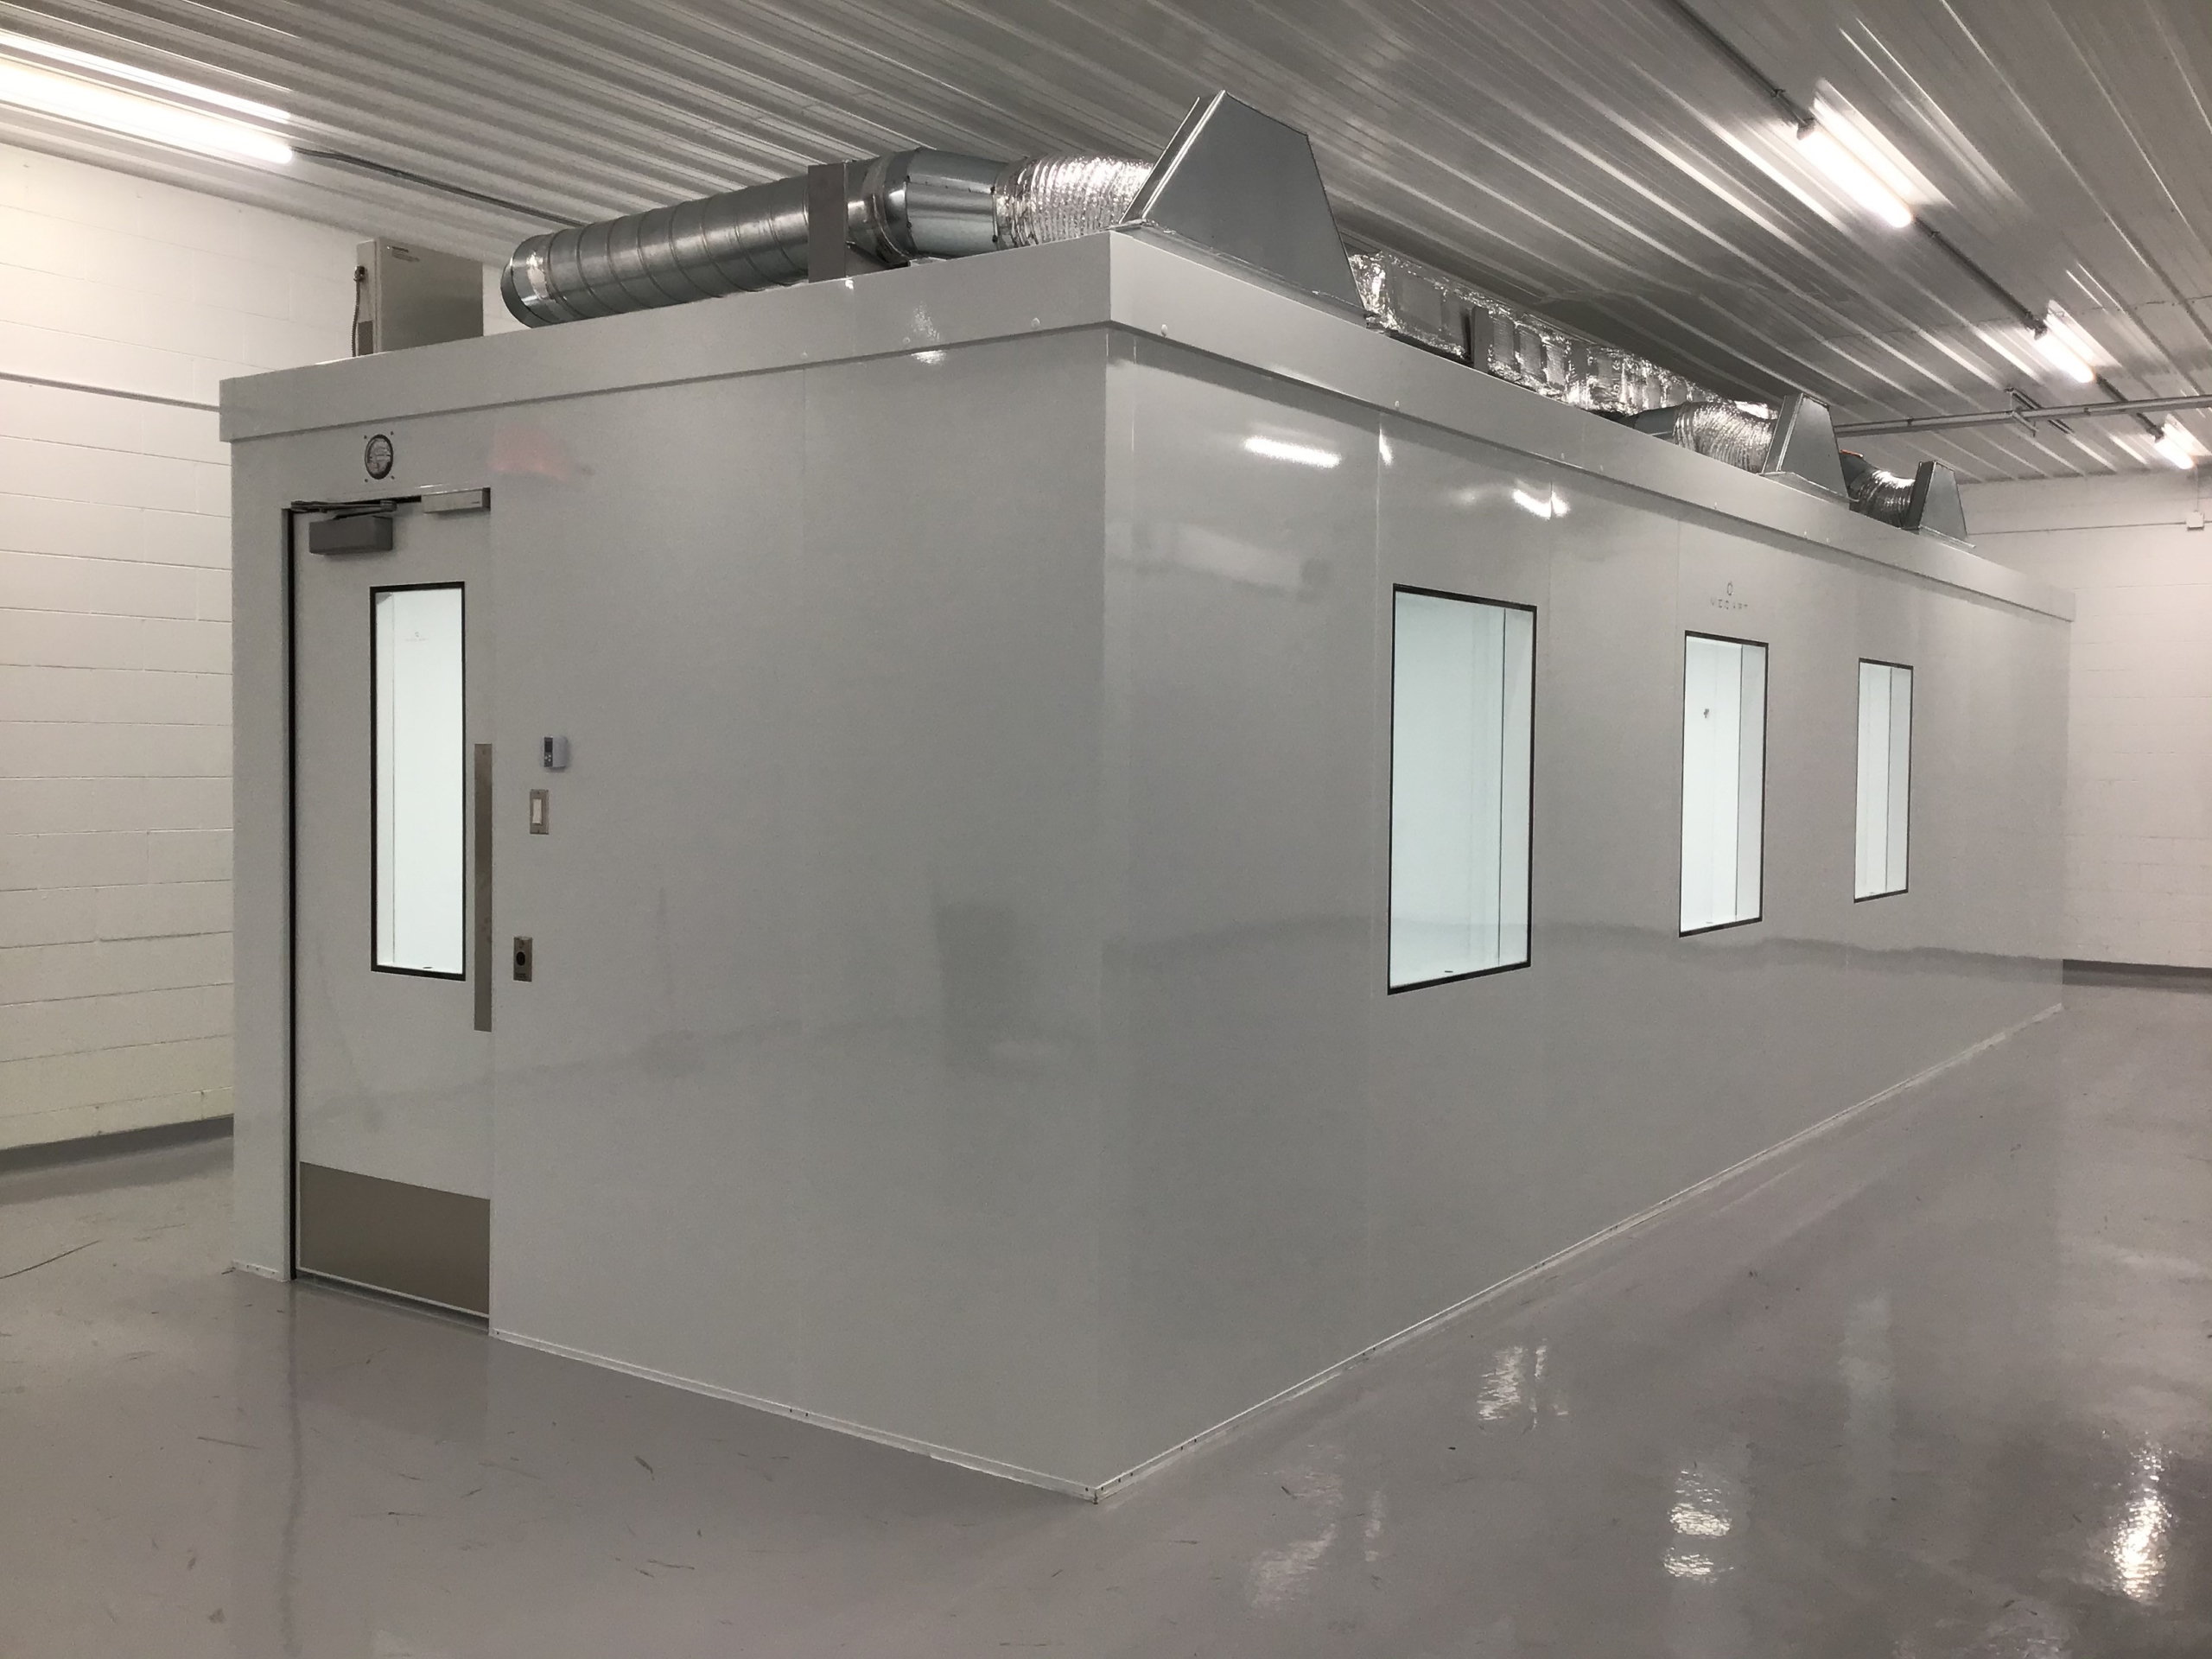 cGMP & Biotech Cleanroom for Stem Cell Manufacturing – Theranostics